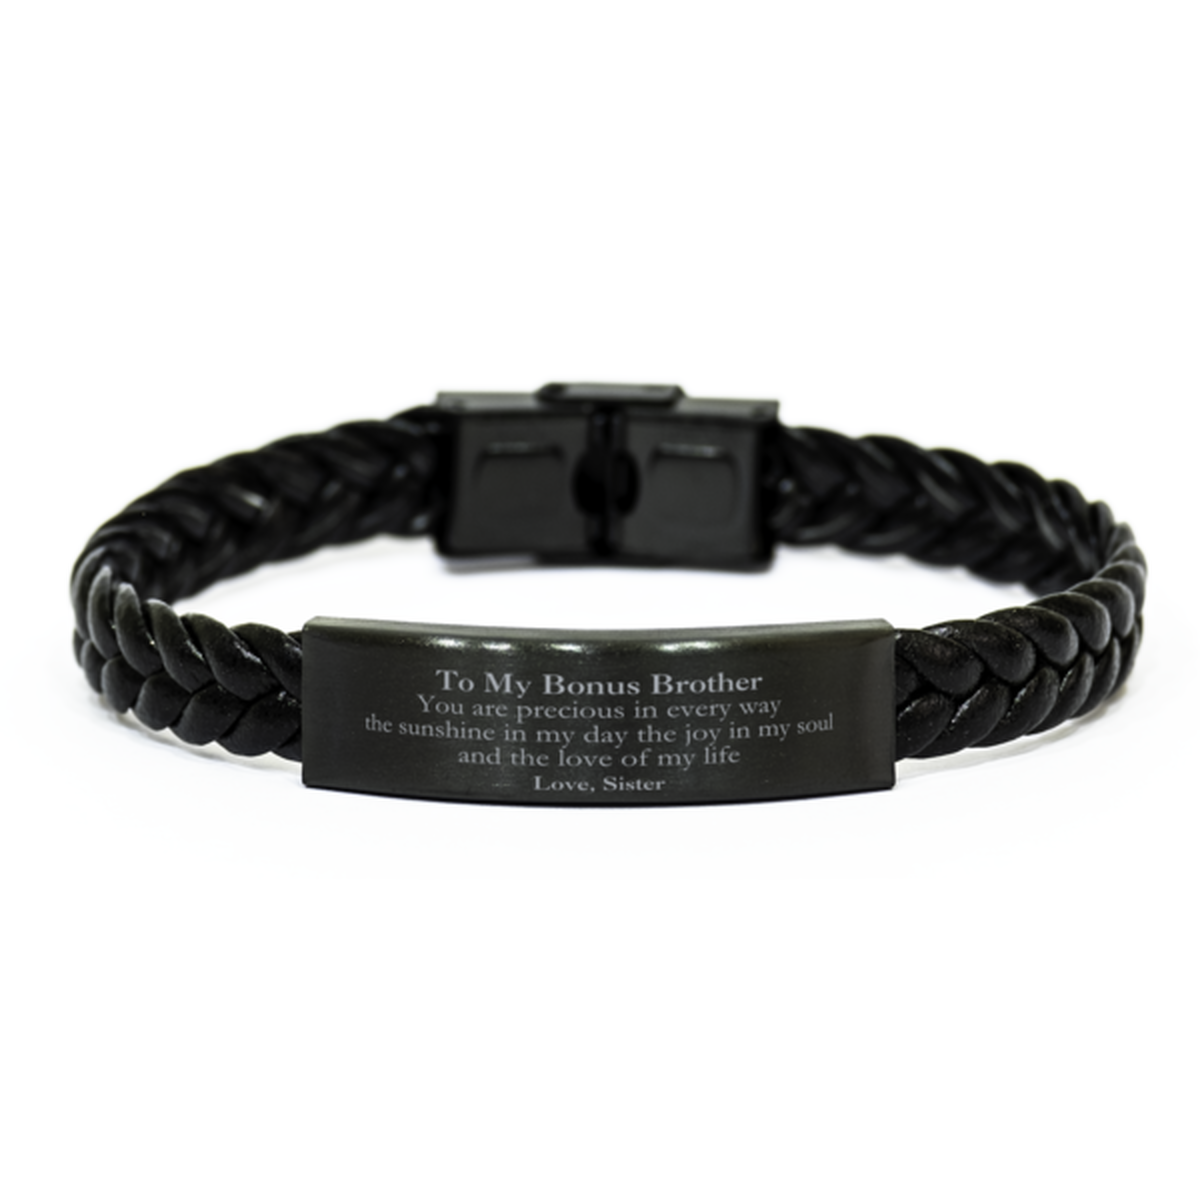 Graduation Gifts for Bonus Brother Braided Leather Bracelet Present from Sister, Christmas Bonus Brother Birthday Gifts Bonus Brother You are precious in every way the sunshine in my day. Love, Sister